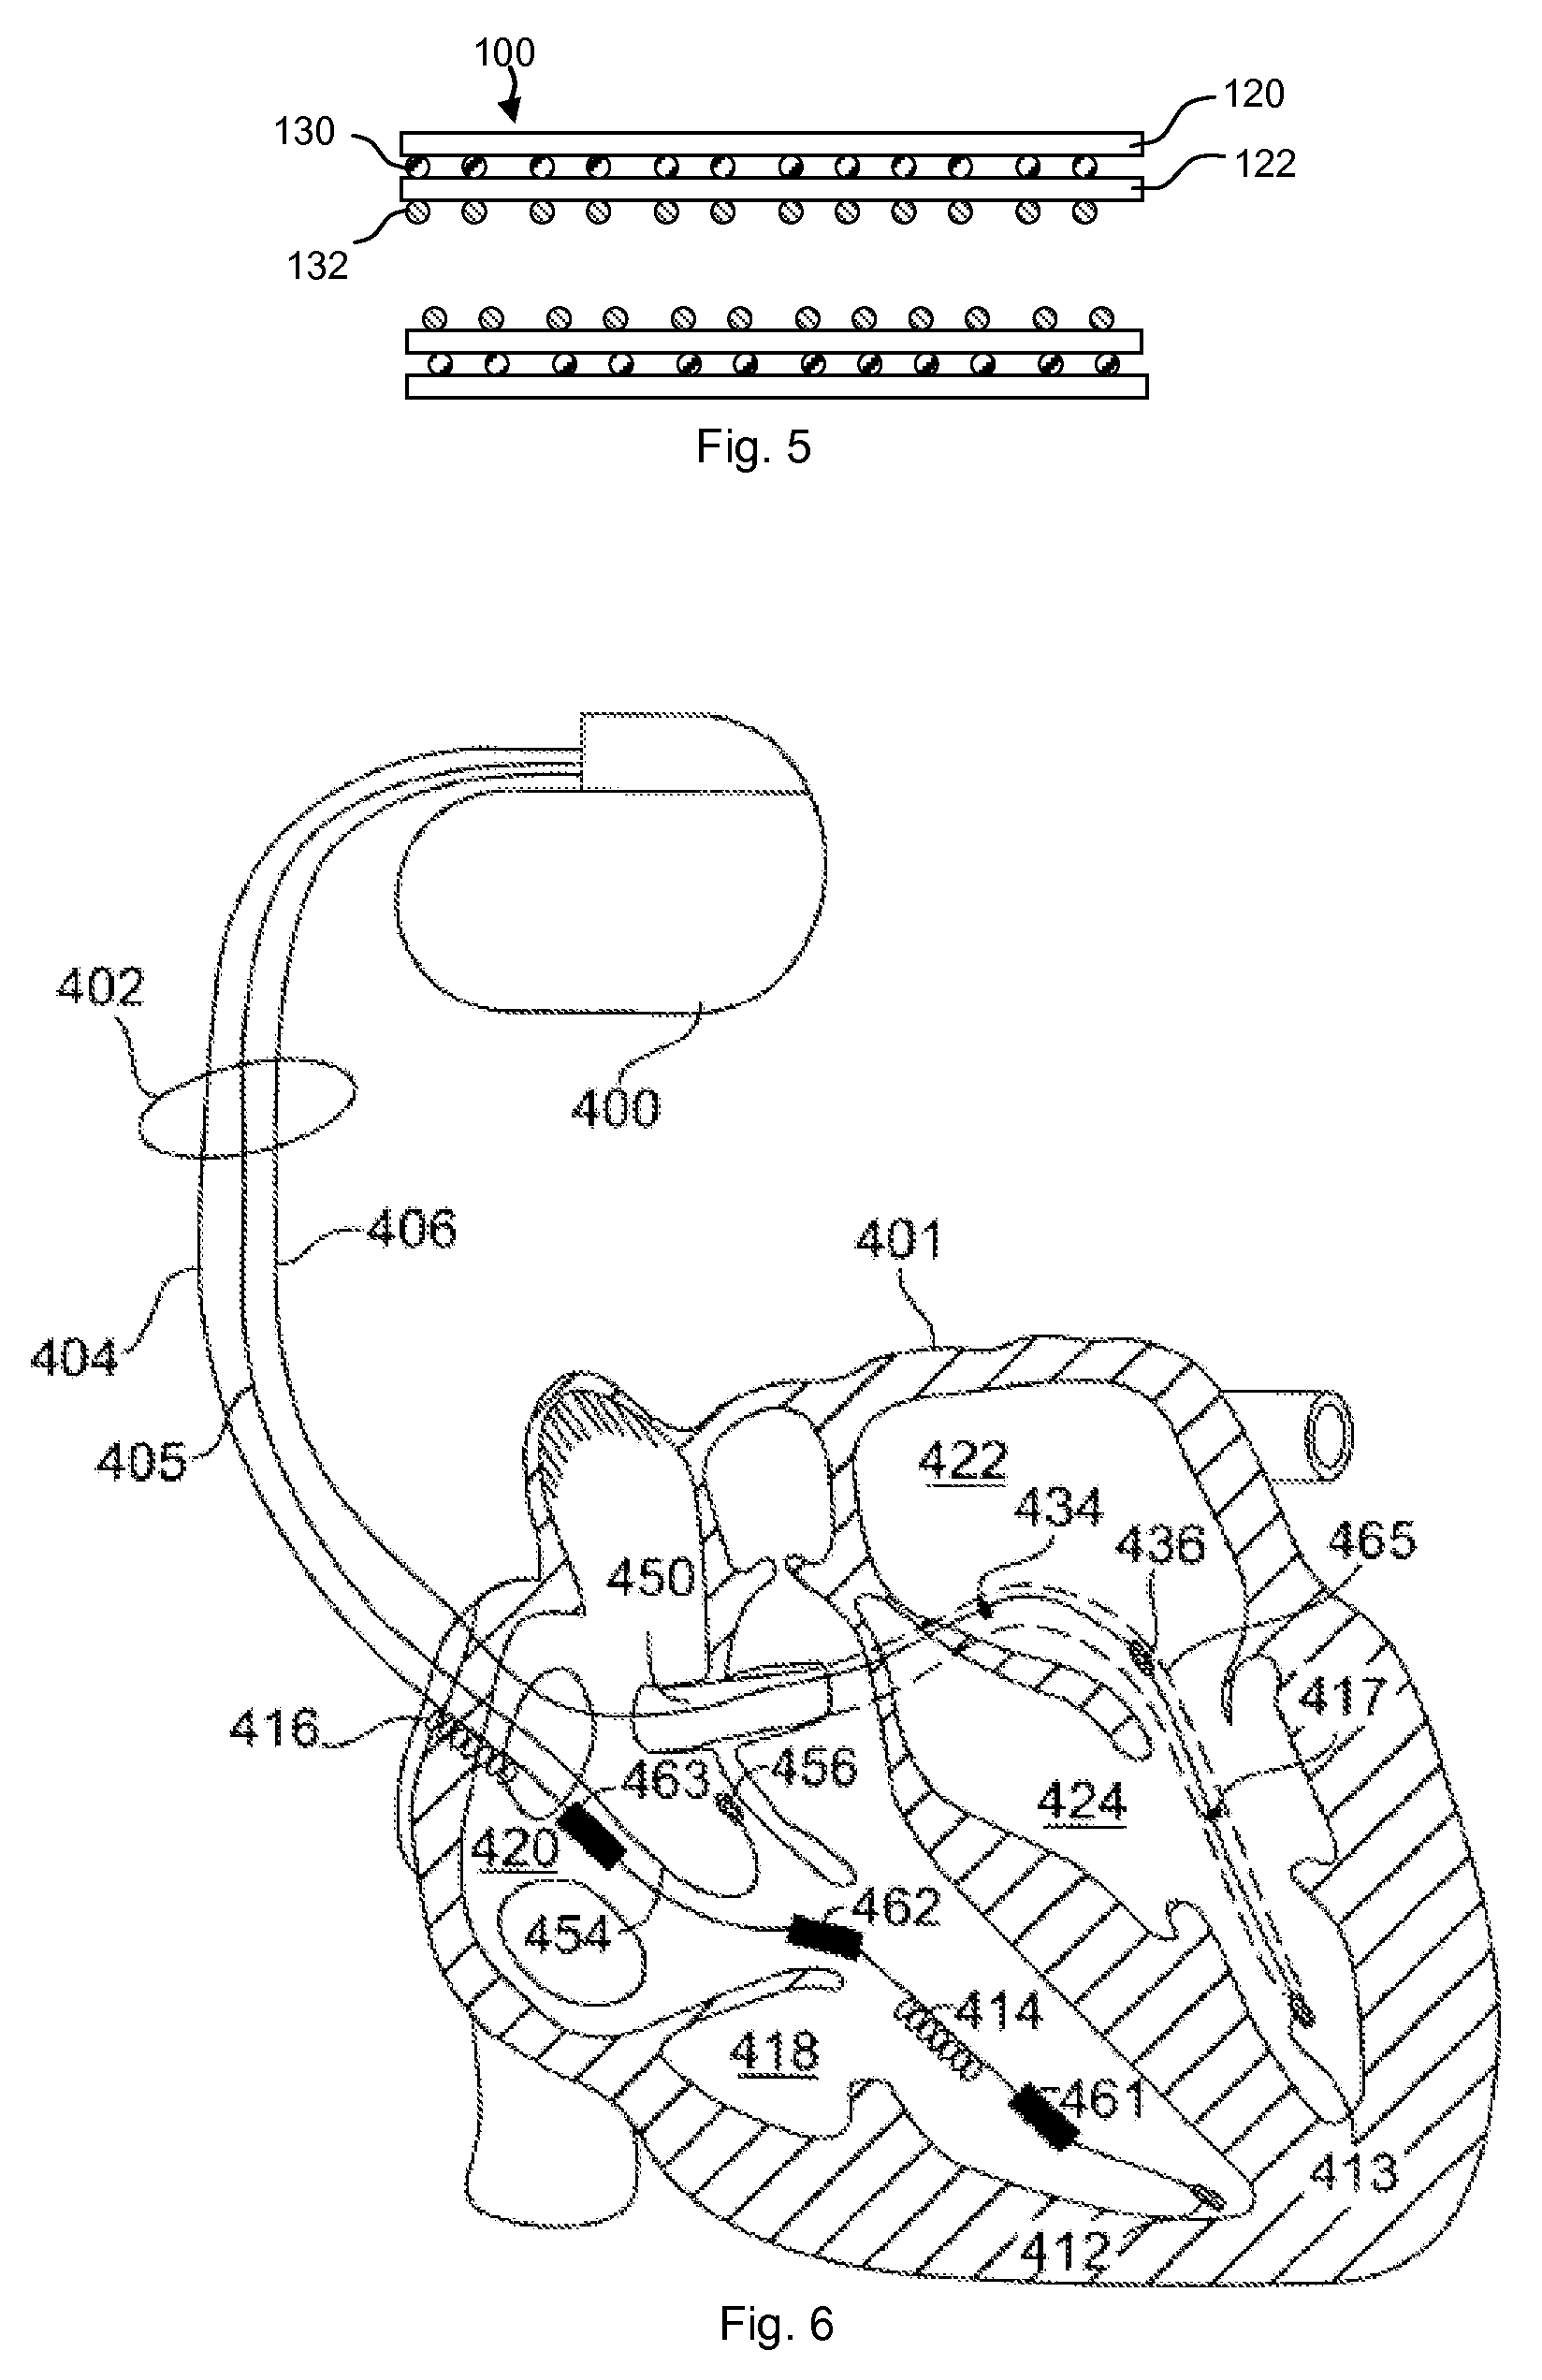 Styrene-isobutylene copolymers and medical devices containing the same